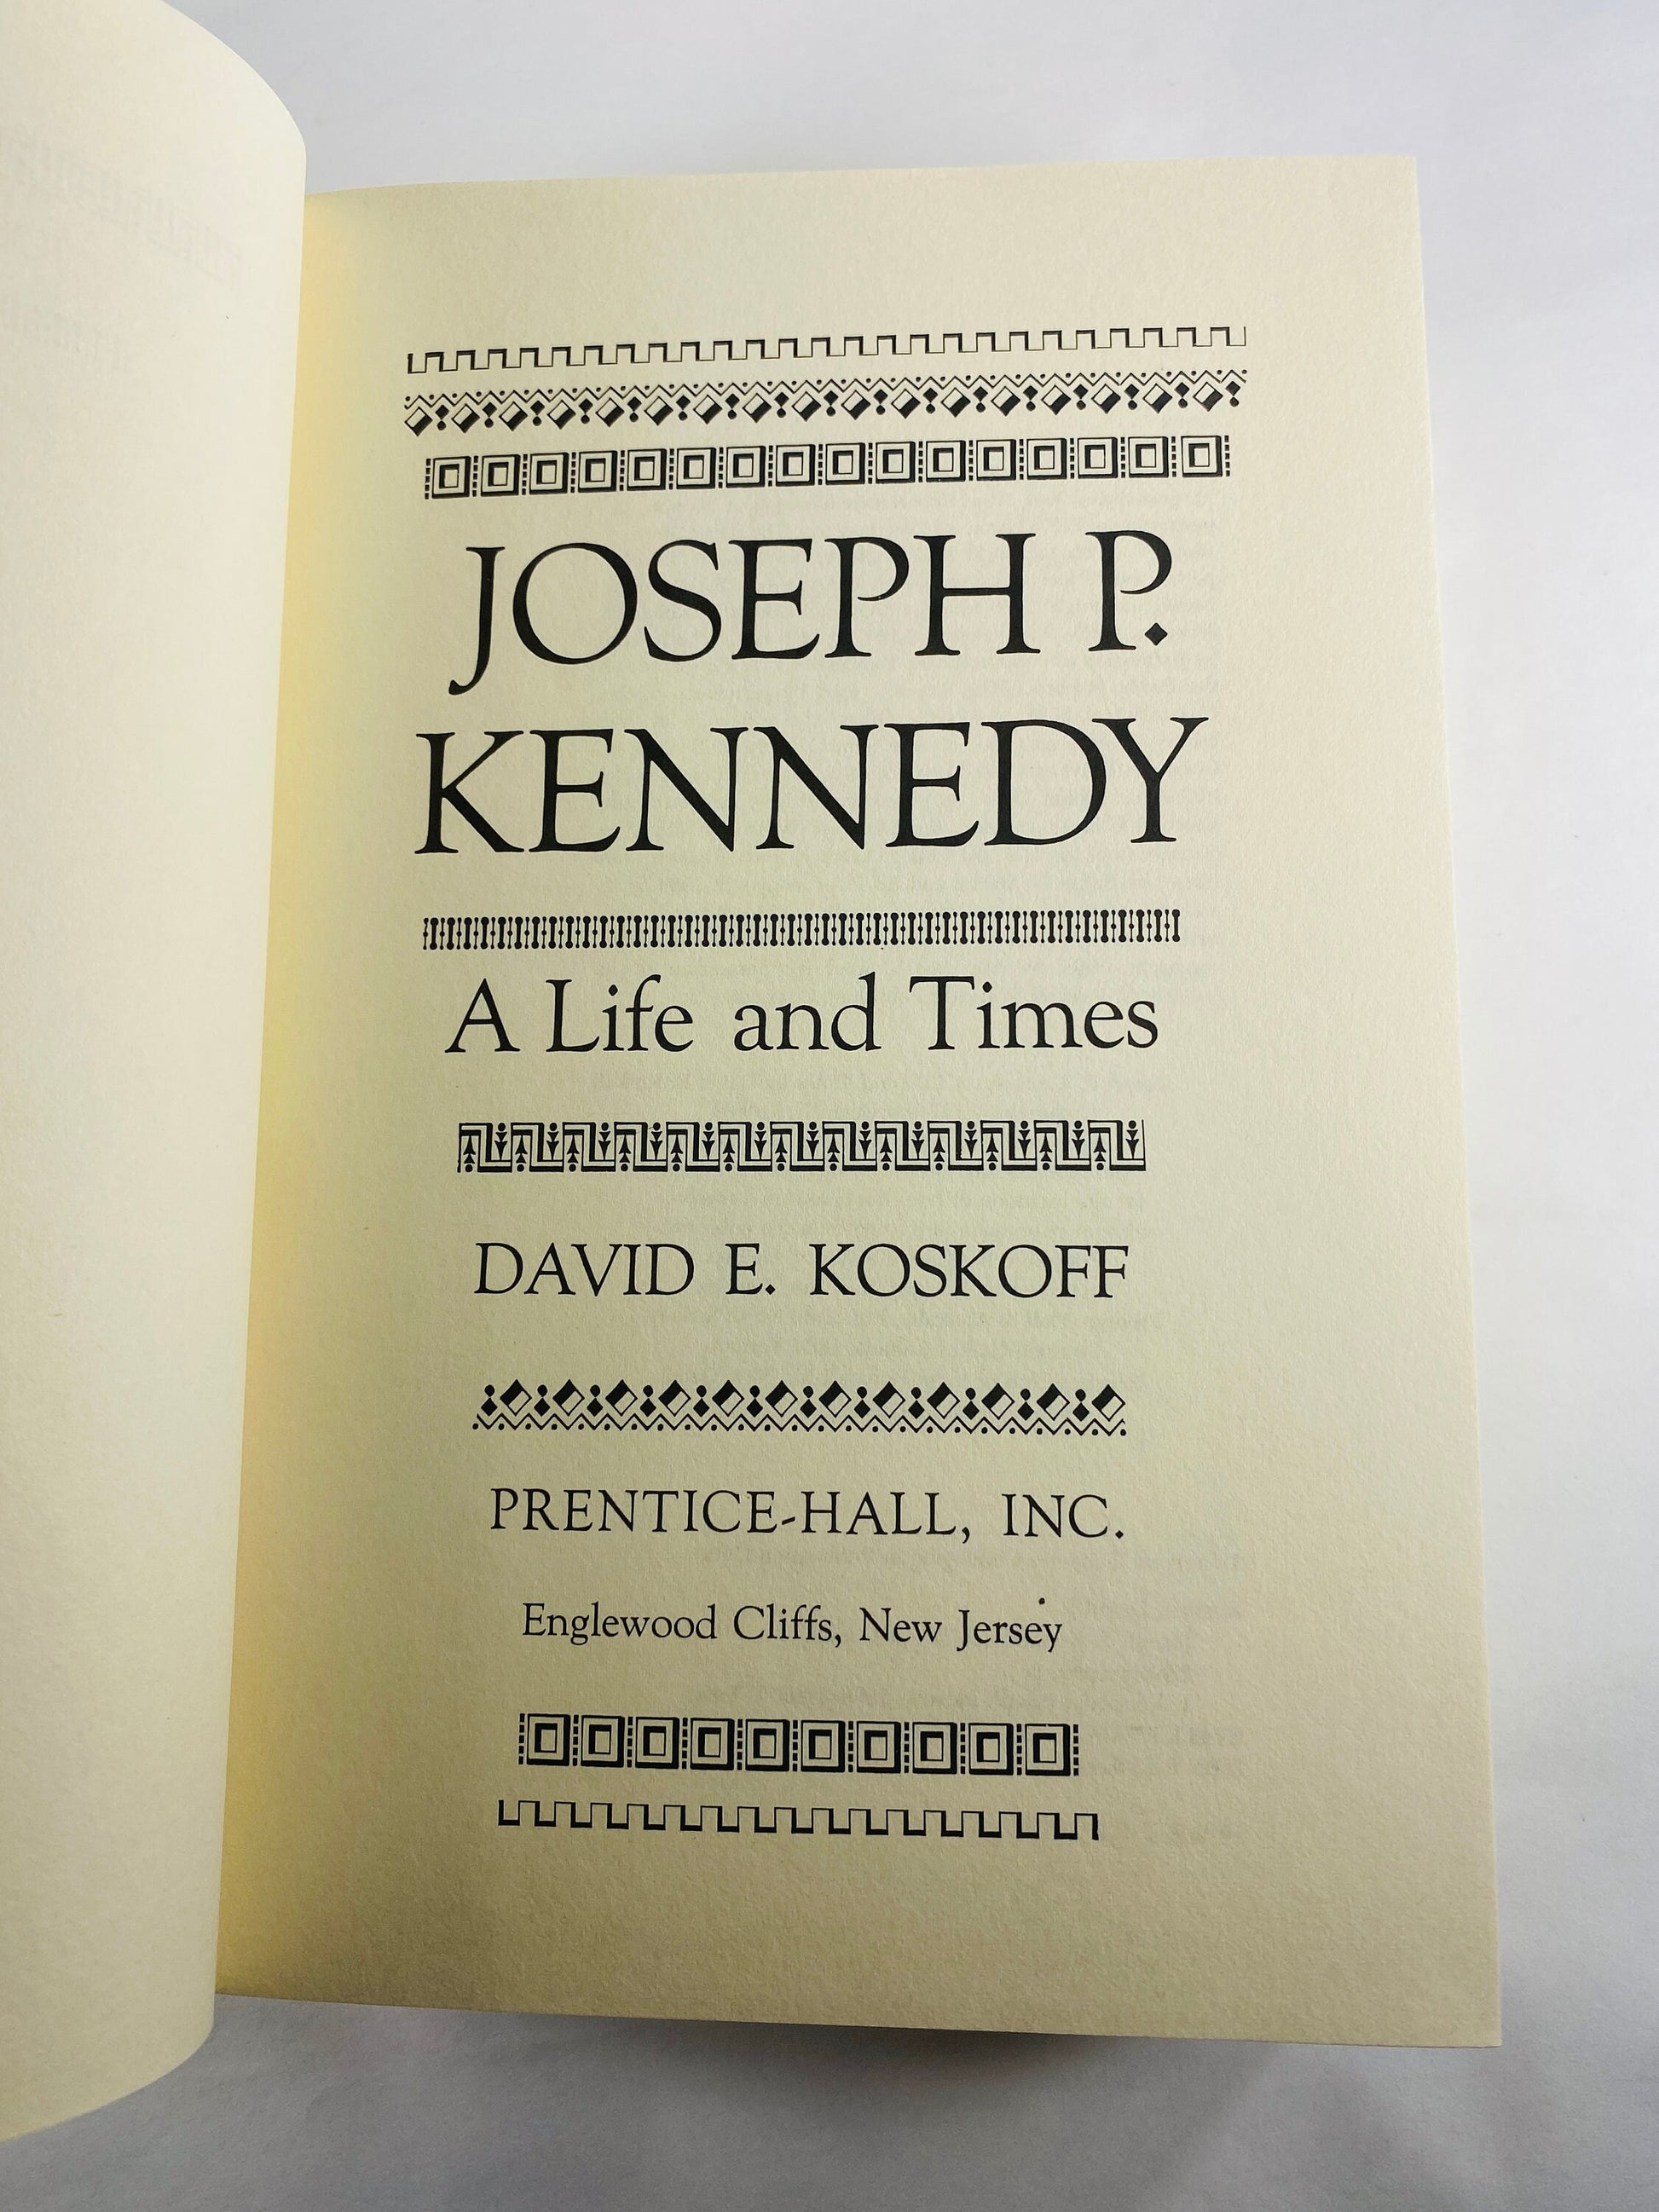 Joseph Kennedy vintage book by David Koskoff circa 1974 biography about controversial business dealings and political career